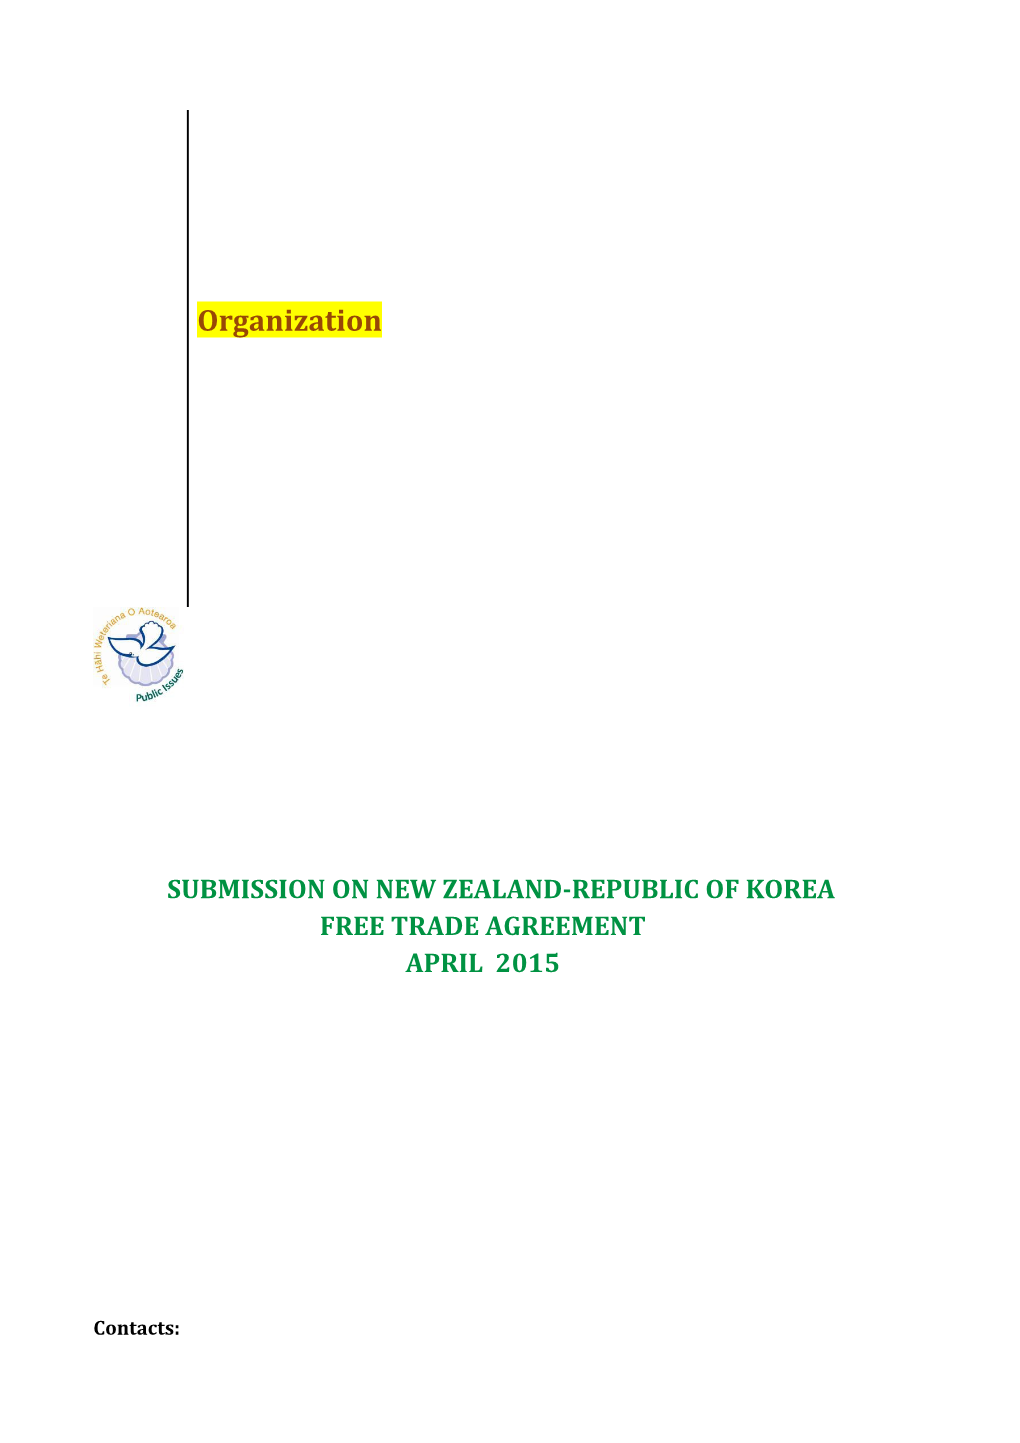 Submission on New Zealand-Republic of Korea Free Trade Agreement April 2015